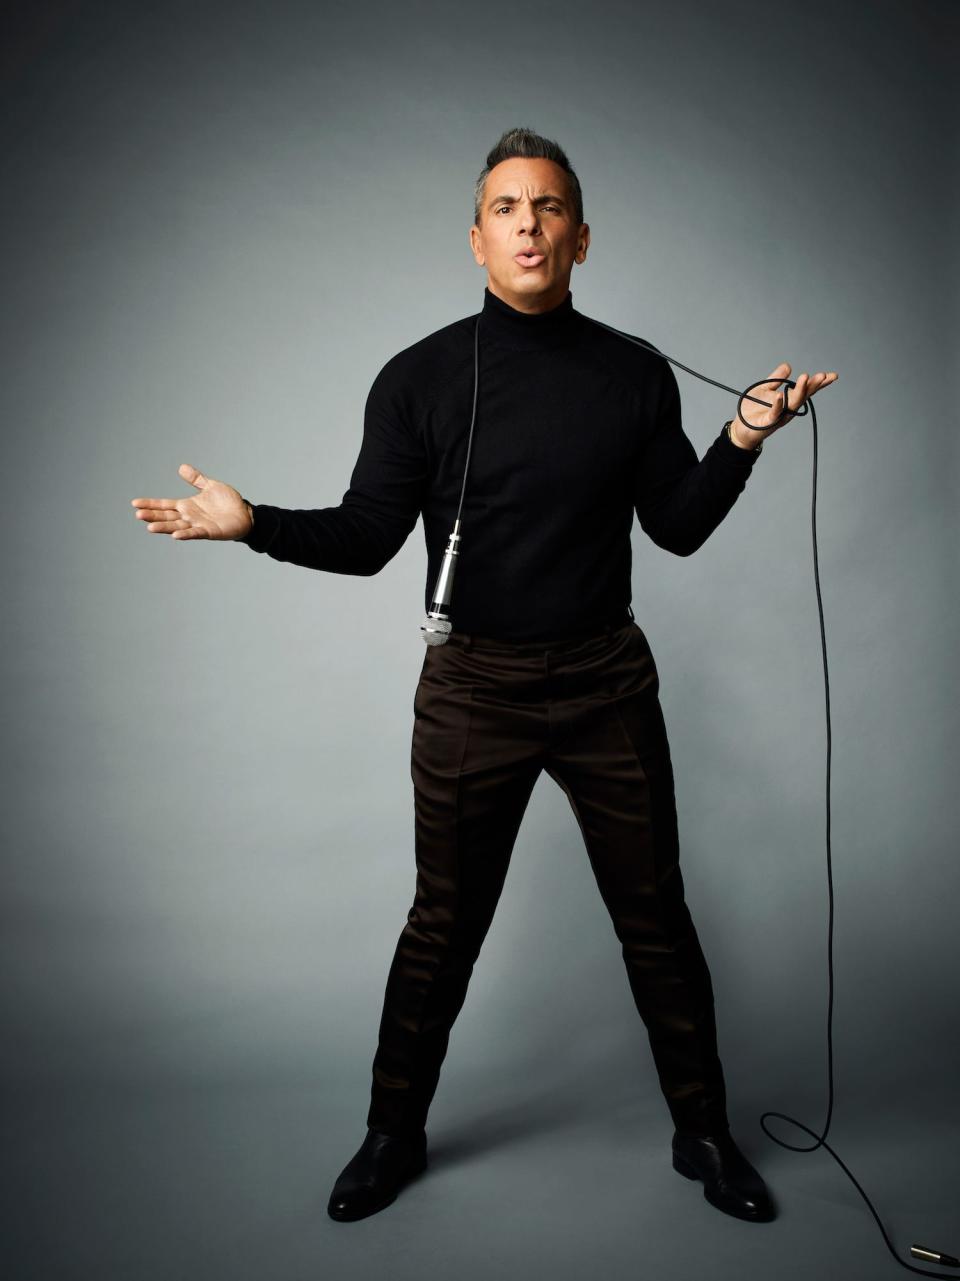 Comedian Sebastian Maniscalco will visit Dr. Phillips Center on May 6 and 7.